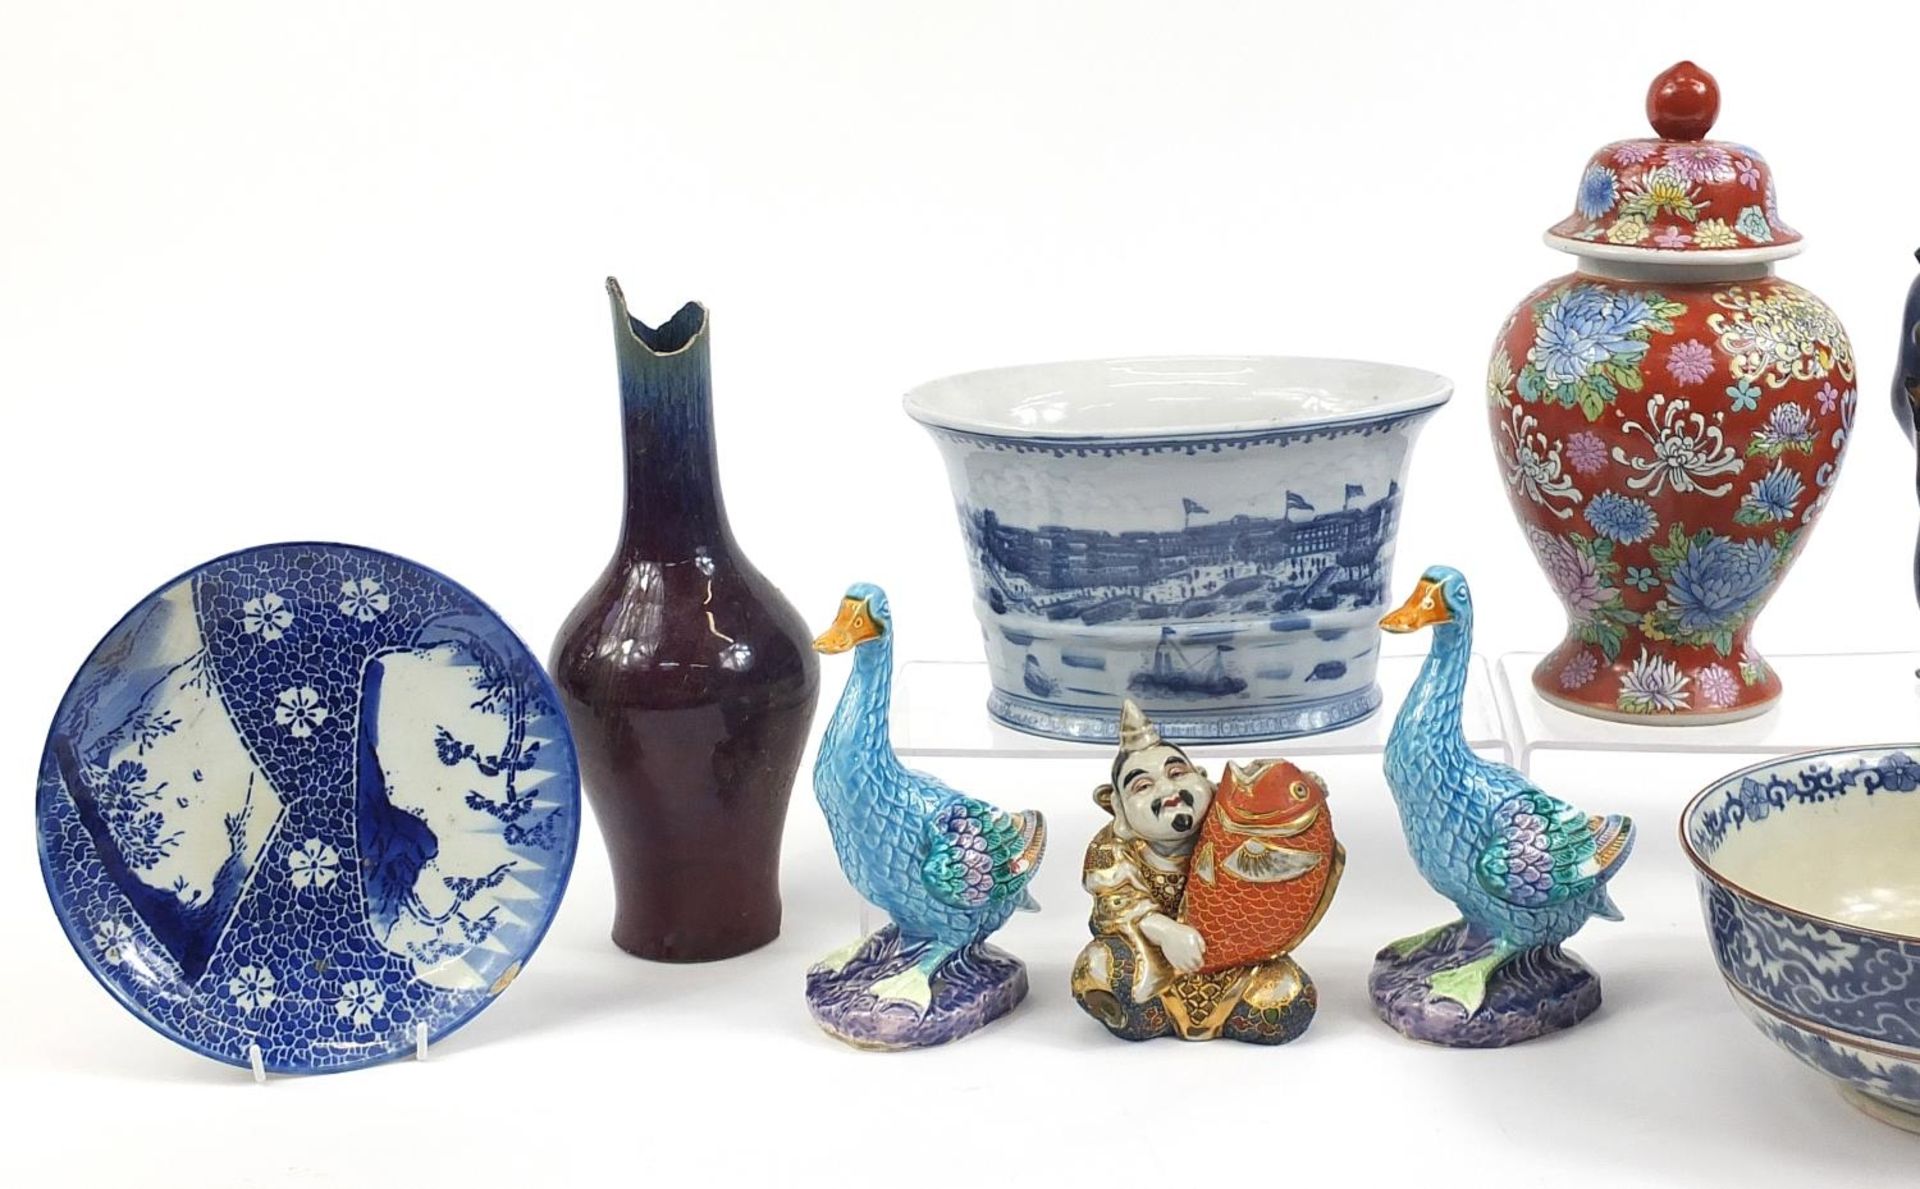 Chinese and Japanese ceramics including a pair of ducks, celadon glazed vase and baluster vase - Image 2 of 3